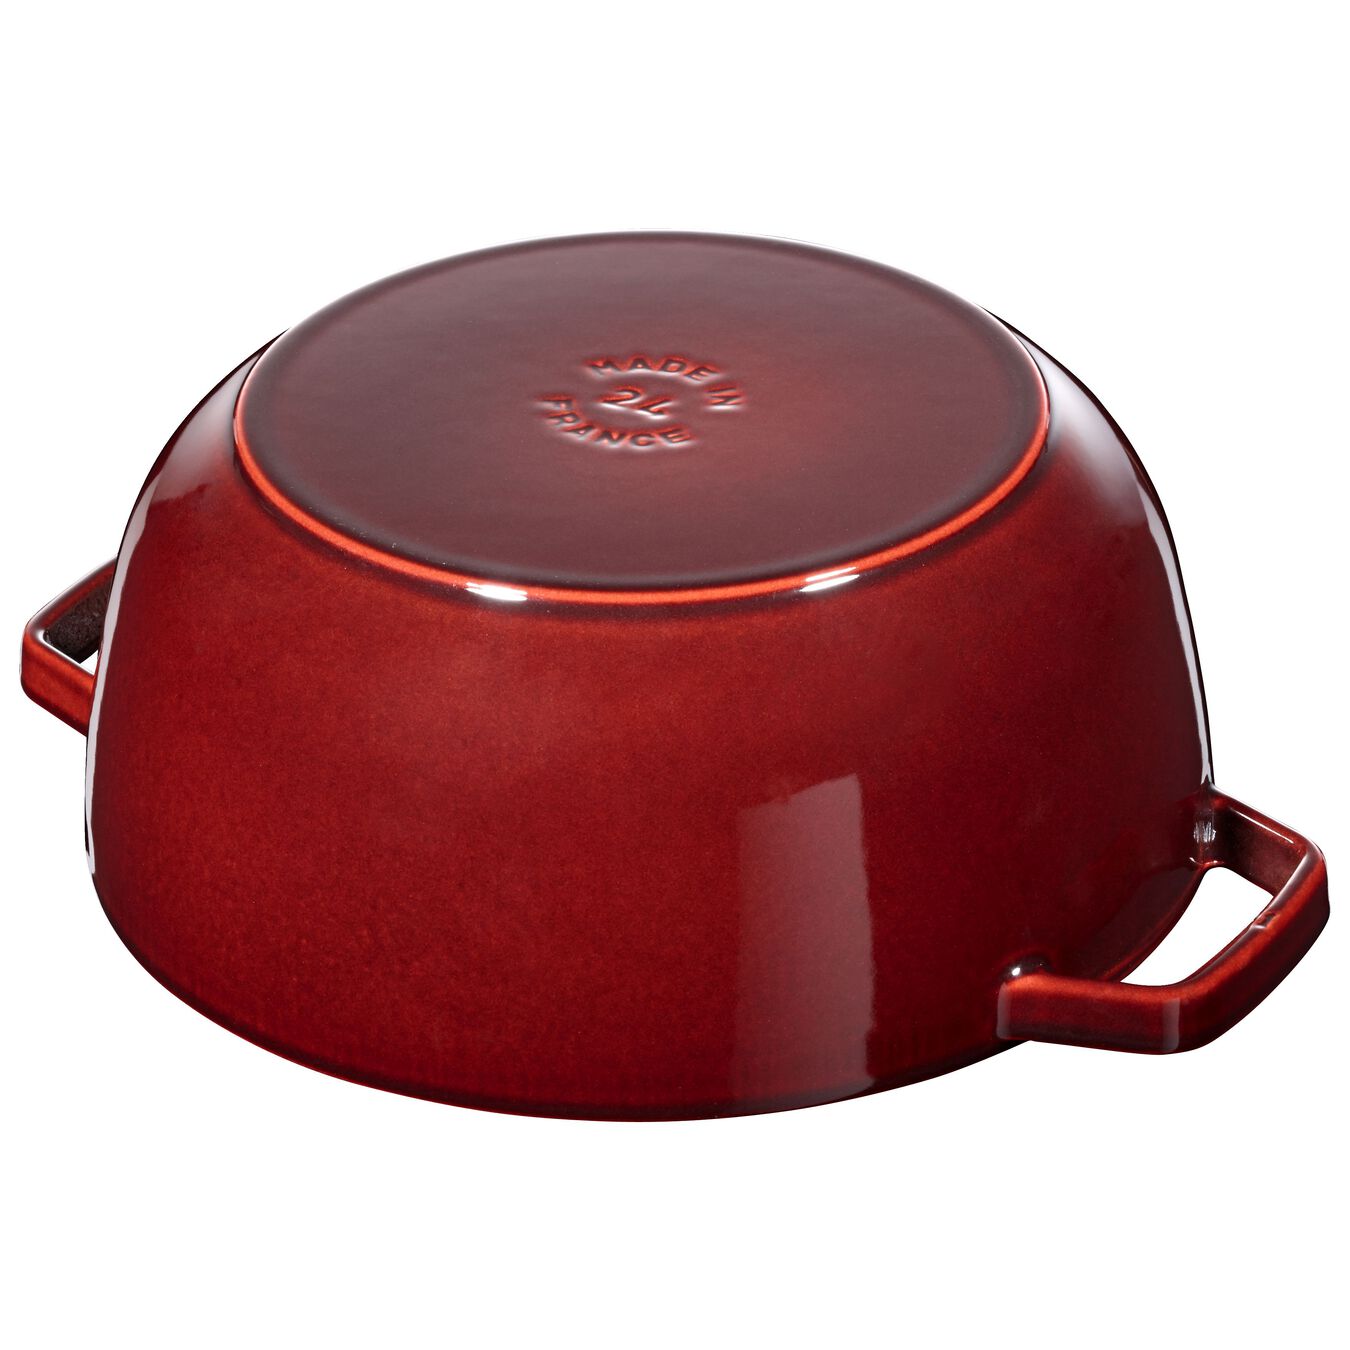 24 cm round Cast iron French oven grenadine-red,,large 4